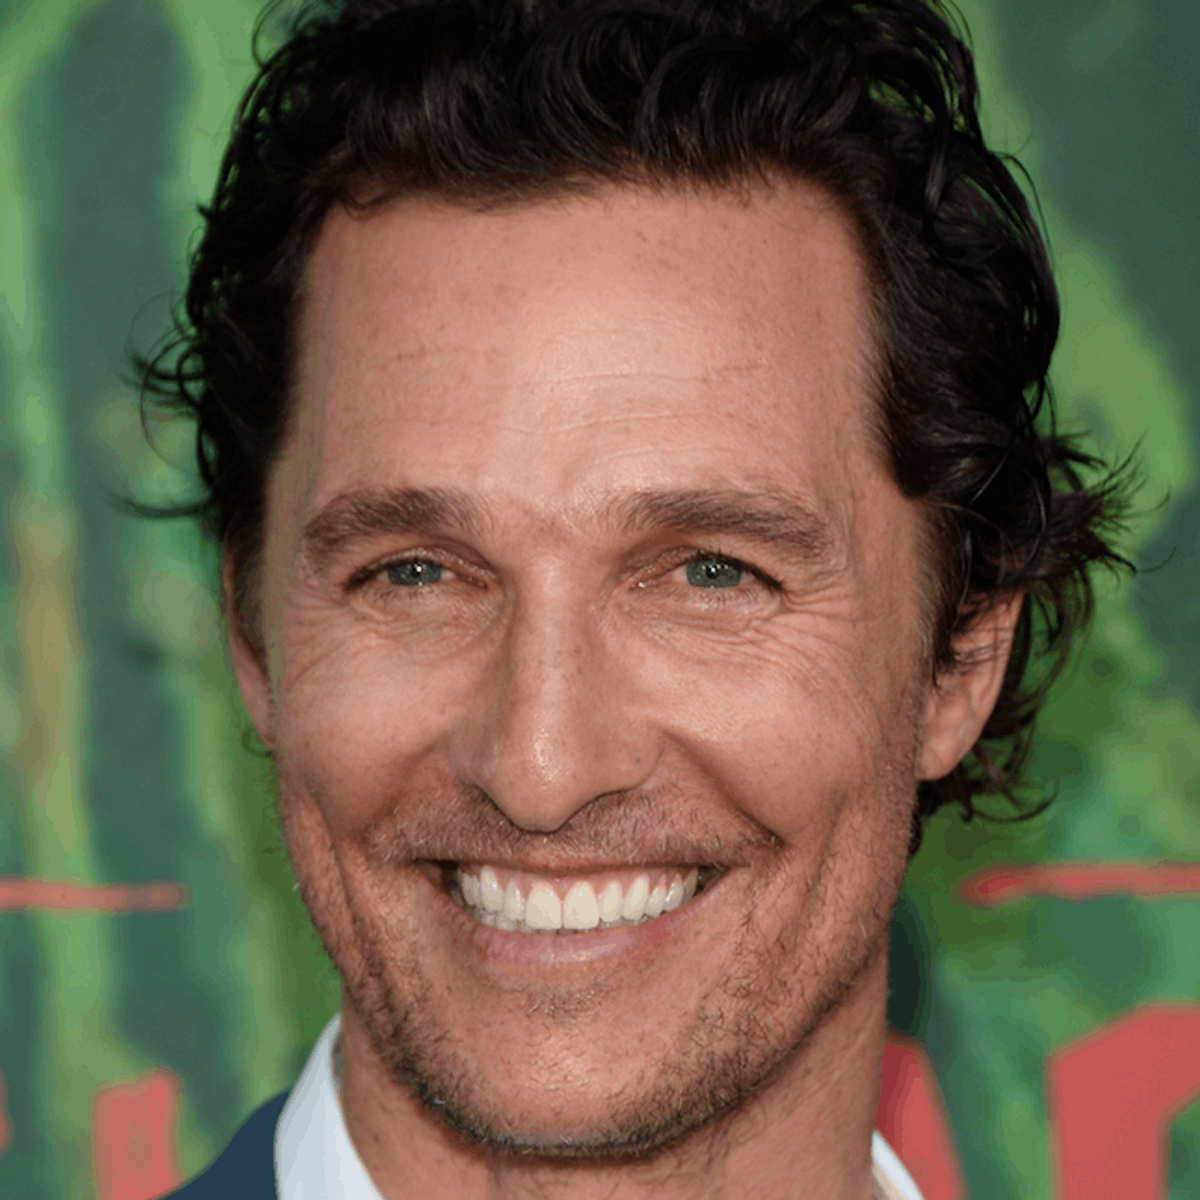 Matthew McConaughey Has a Secret YouTube Account That Will Make You Love Him Even More